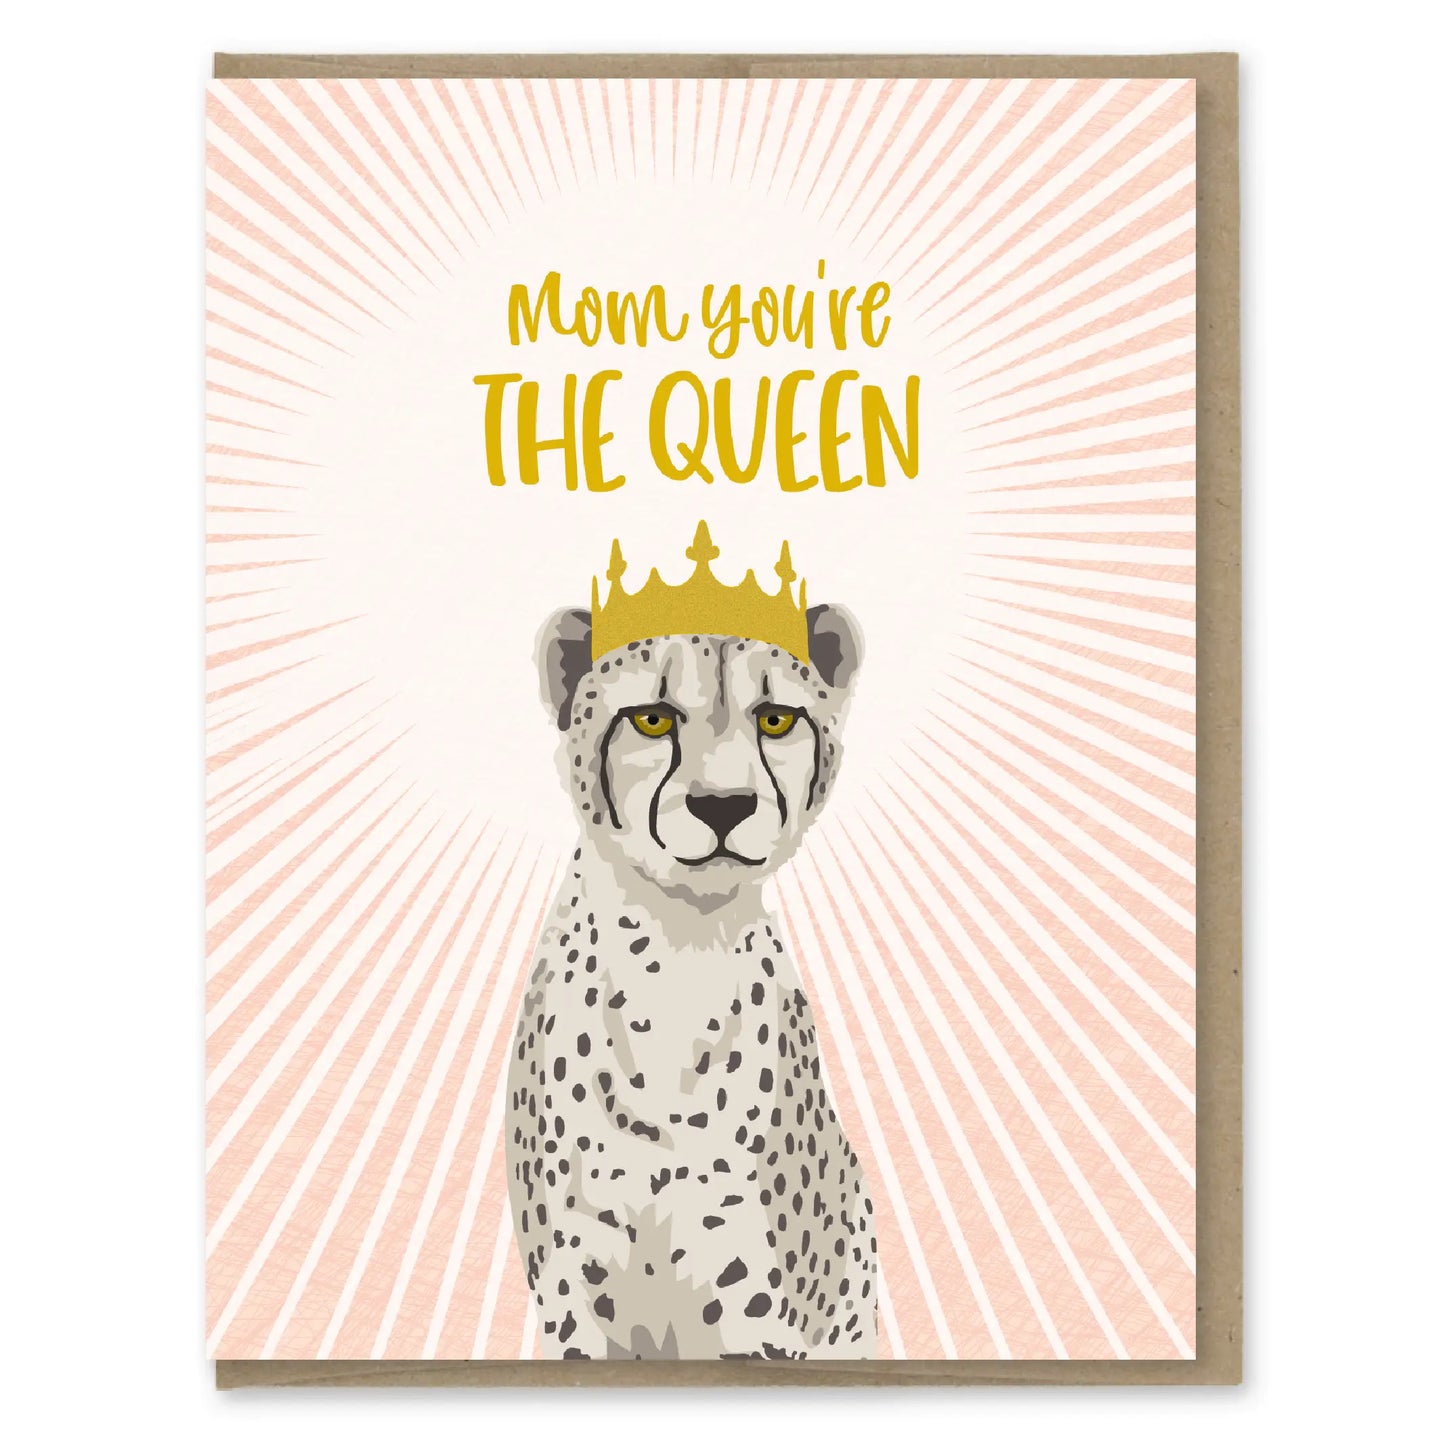 The Queen Mom Mother's Day Card